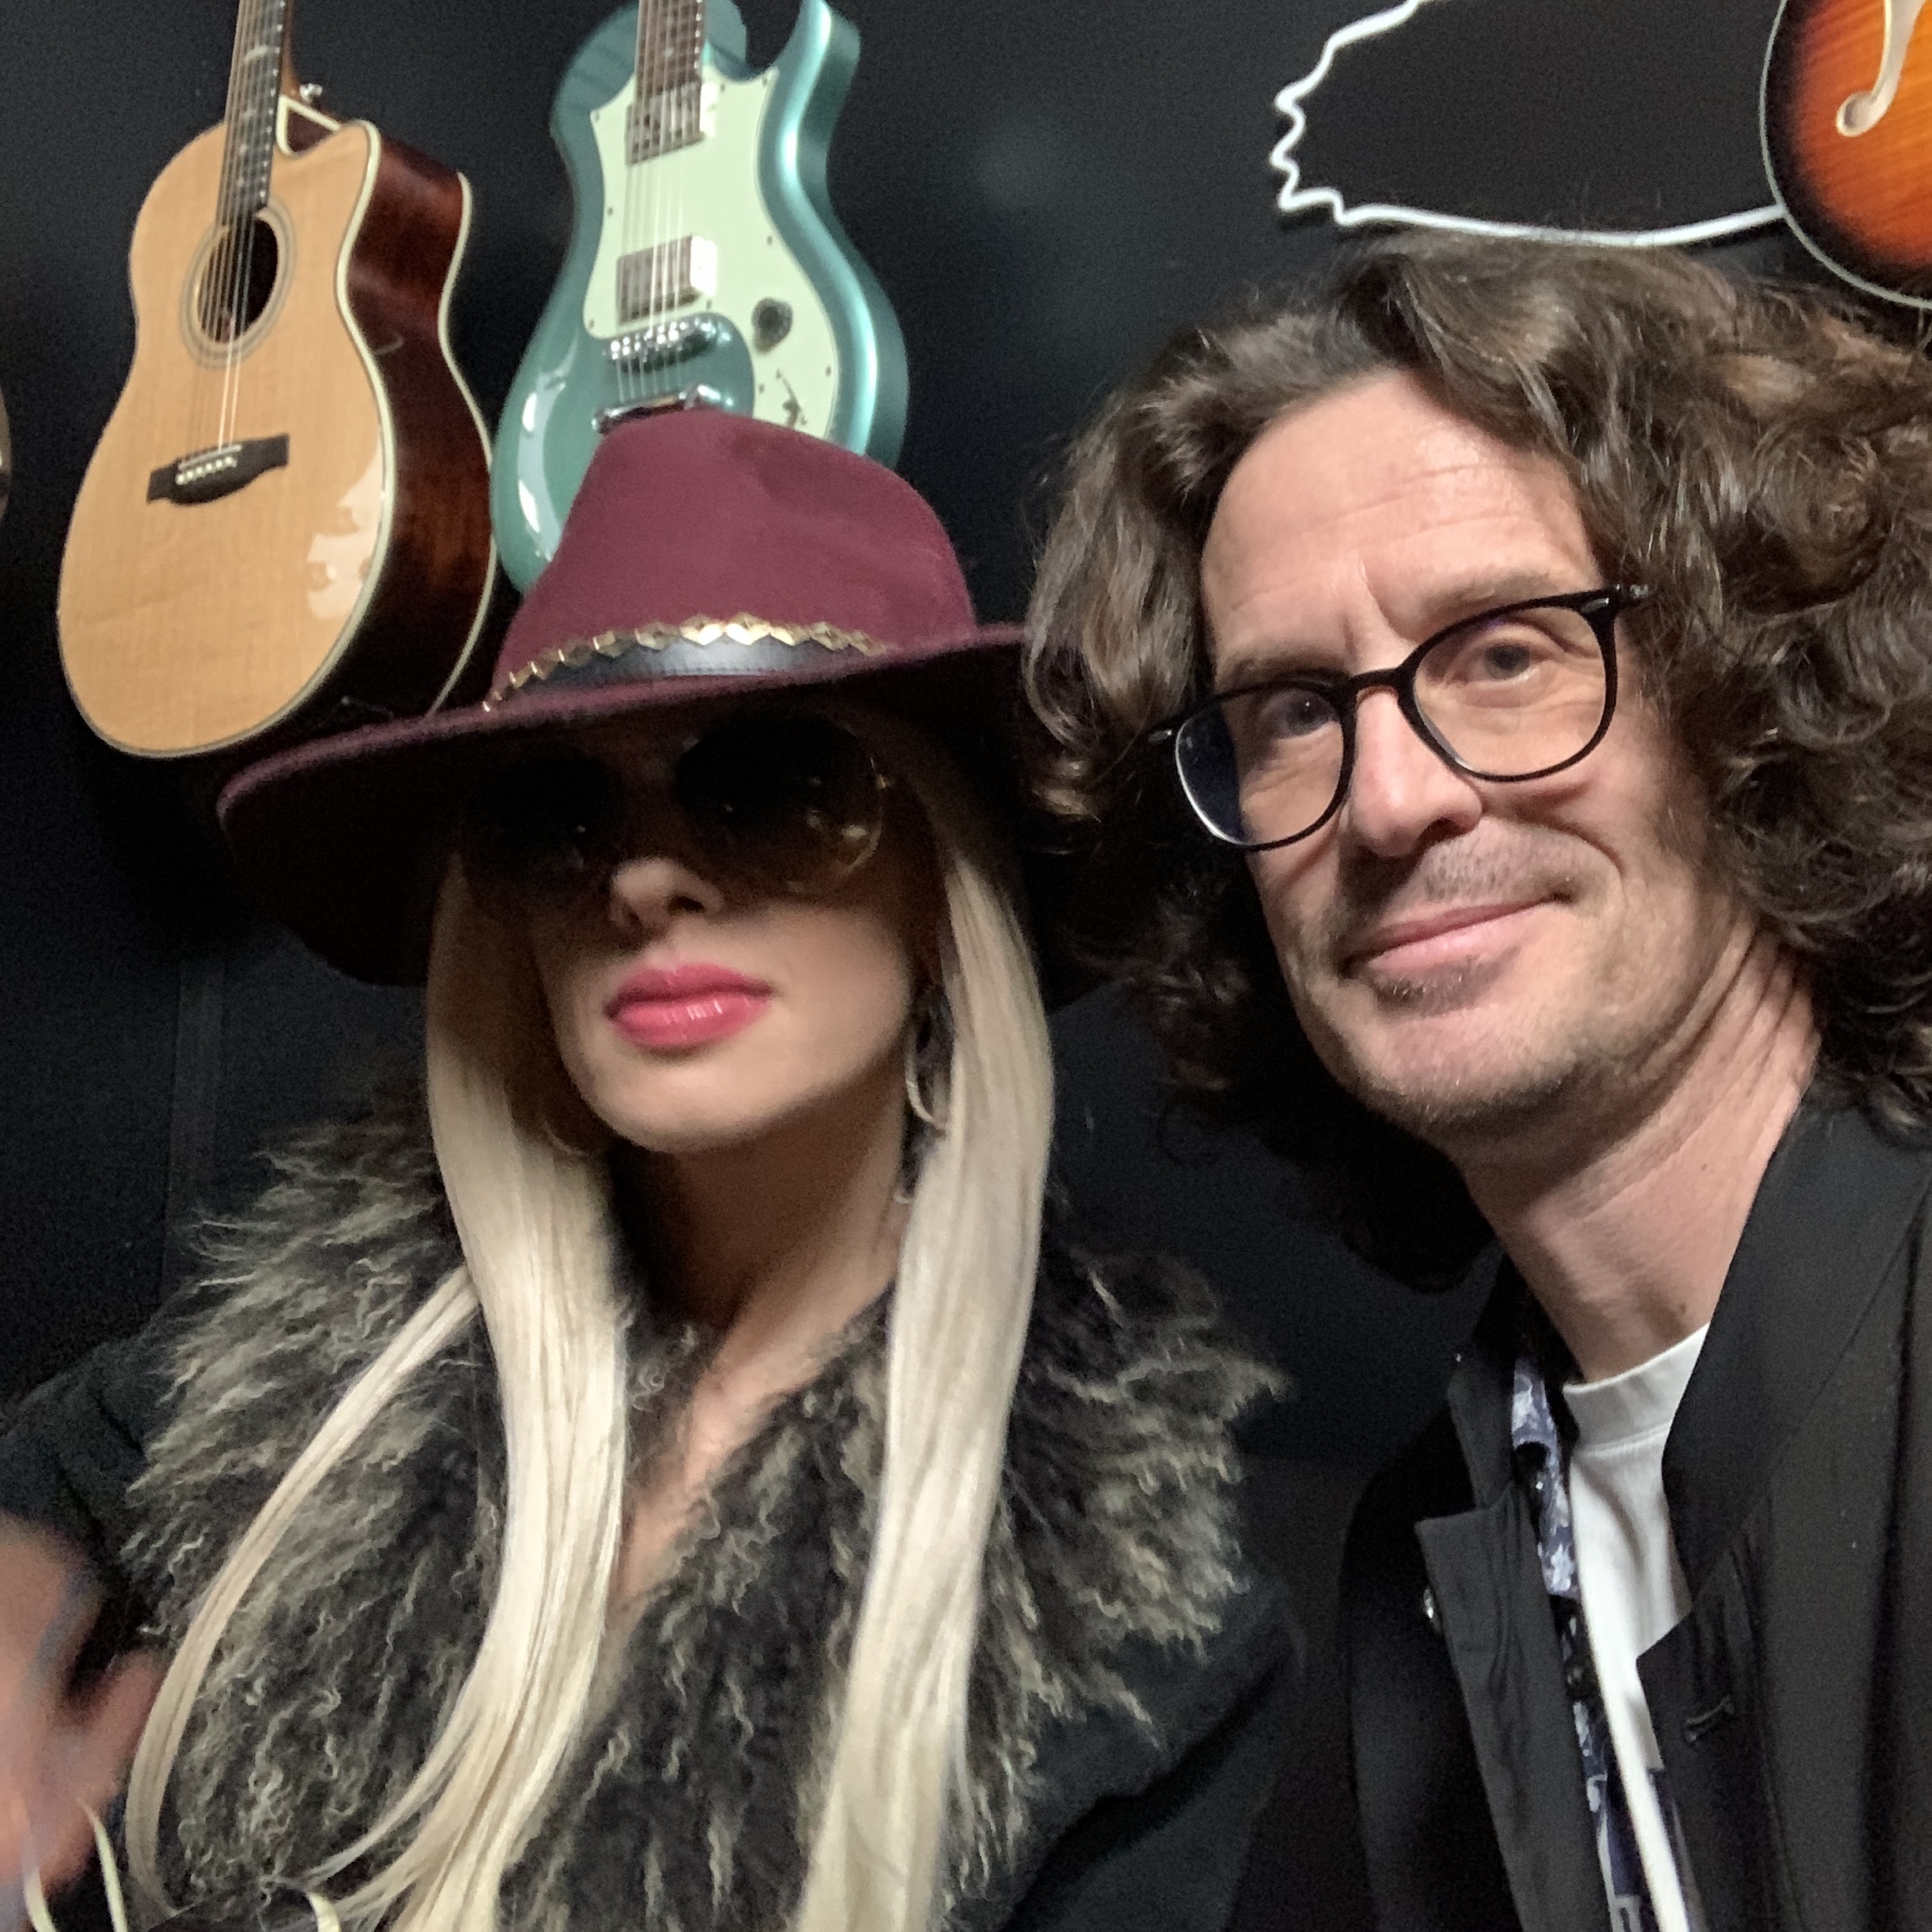 Orianthi interview at the PRS Guitars booth during Winter NAMM 2020